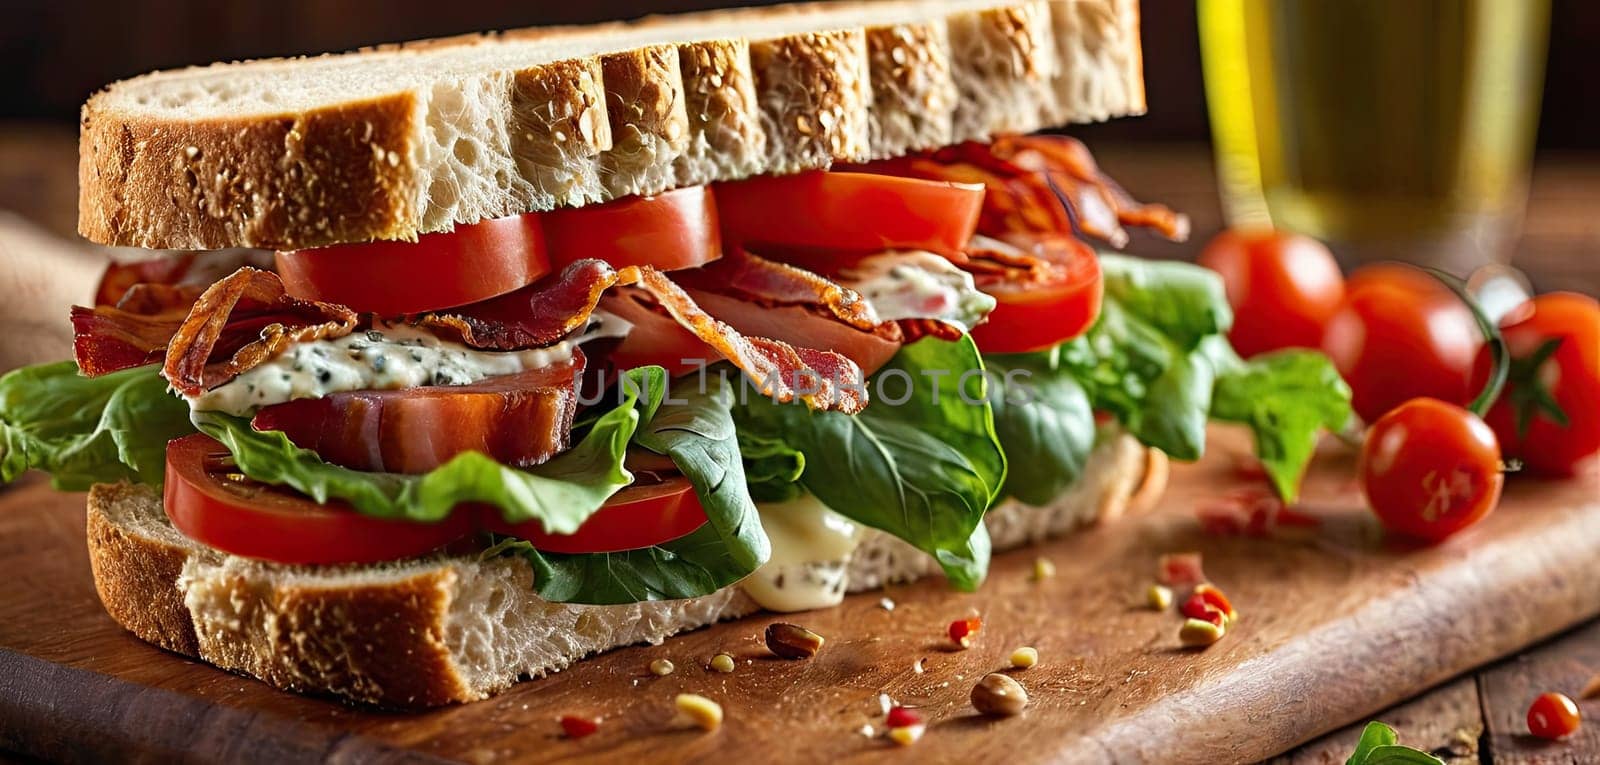 sandwich, extra bacon, seed bread displayed on wooden board in rustic diner